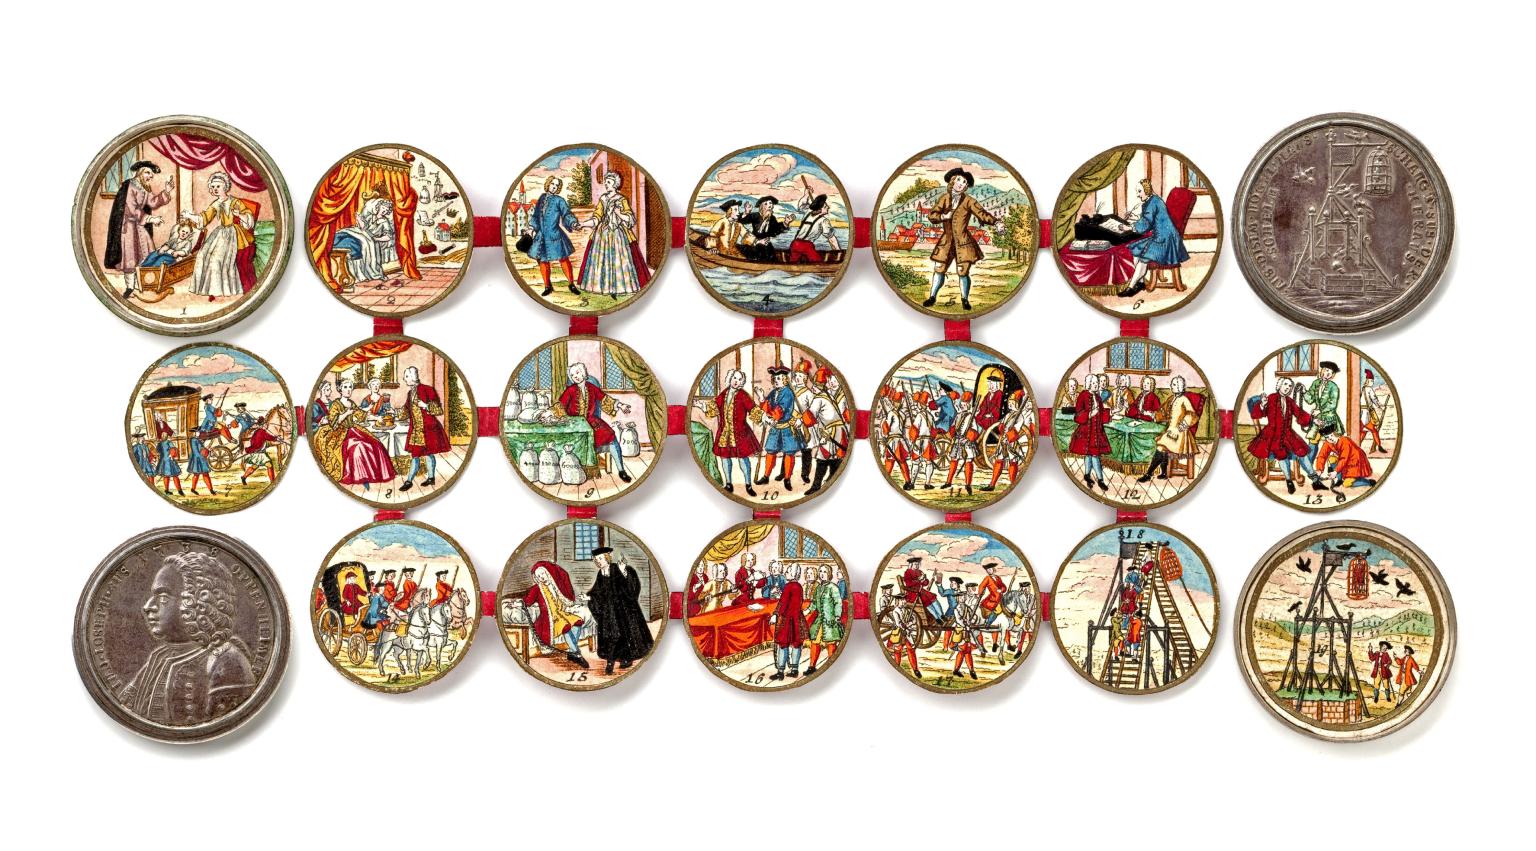 19 illustrations in circular frames connected by ribbon of different painted scenes of man's life from birth to gallows, and two coins, one with gallows and the other with the profile of a man. 